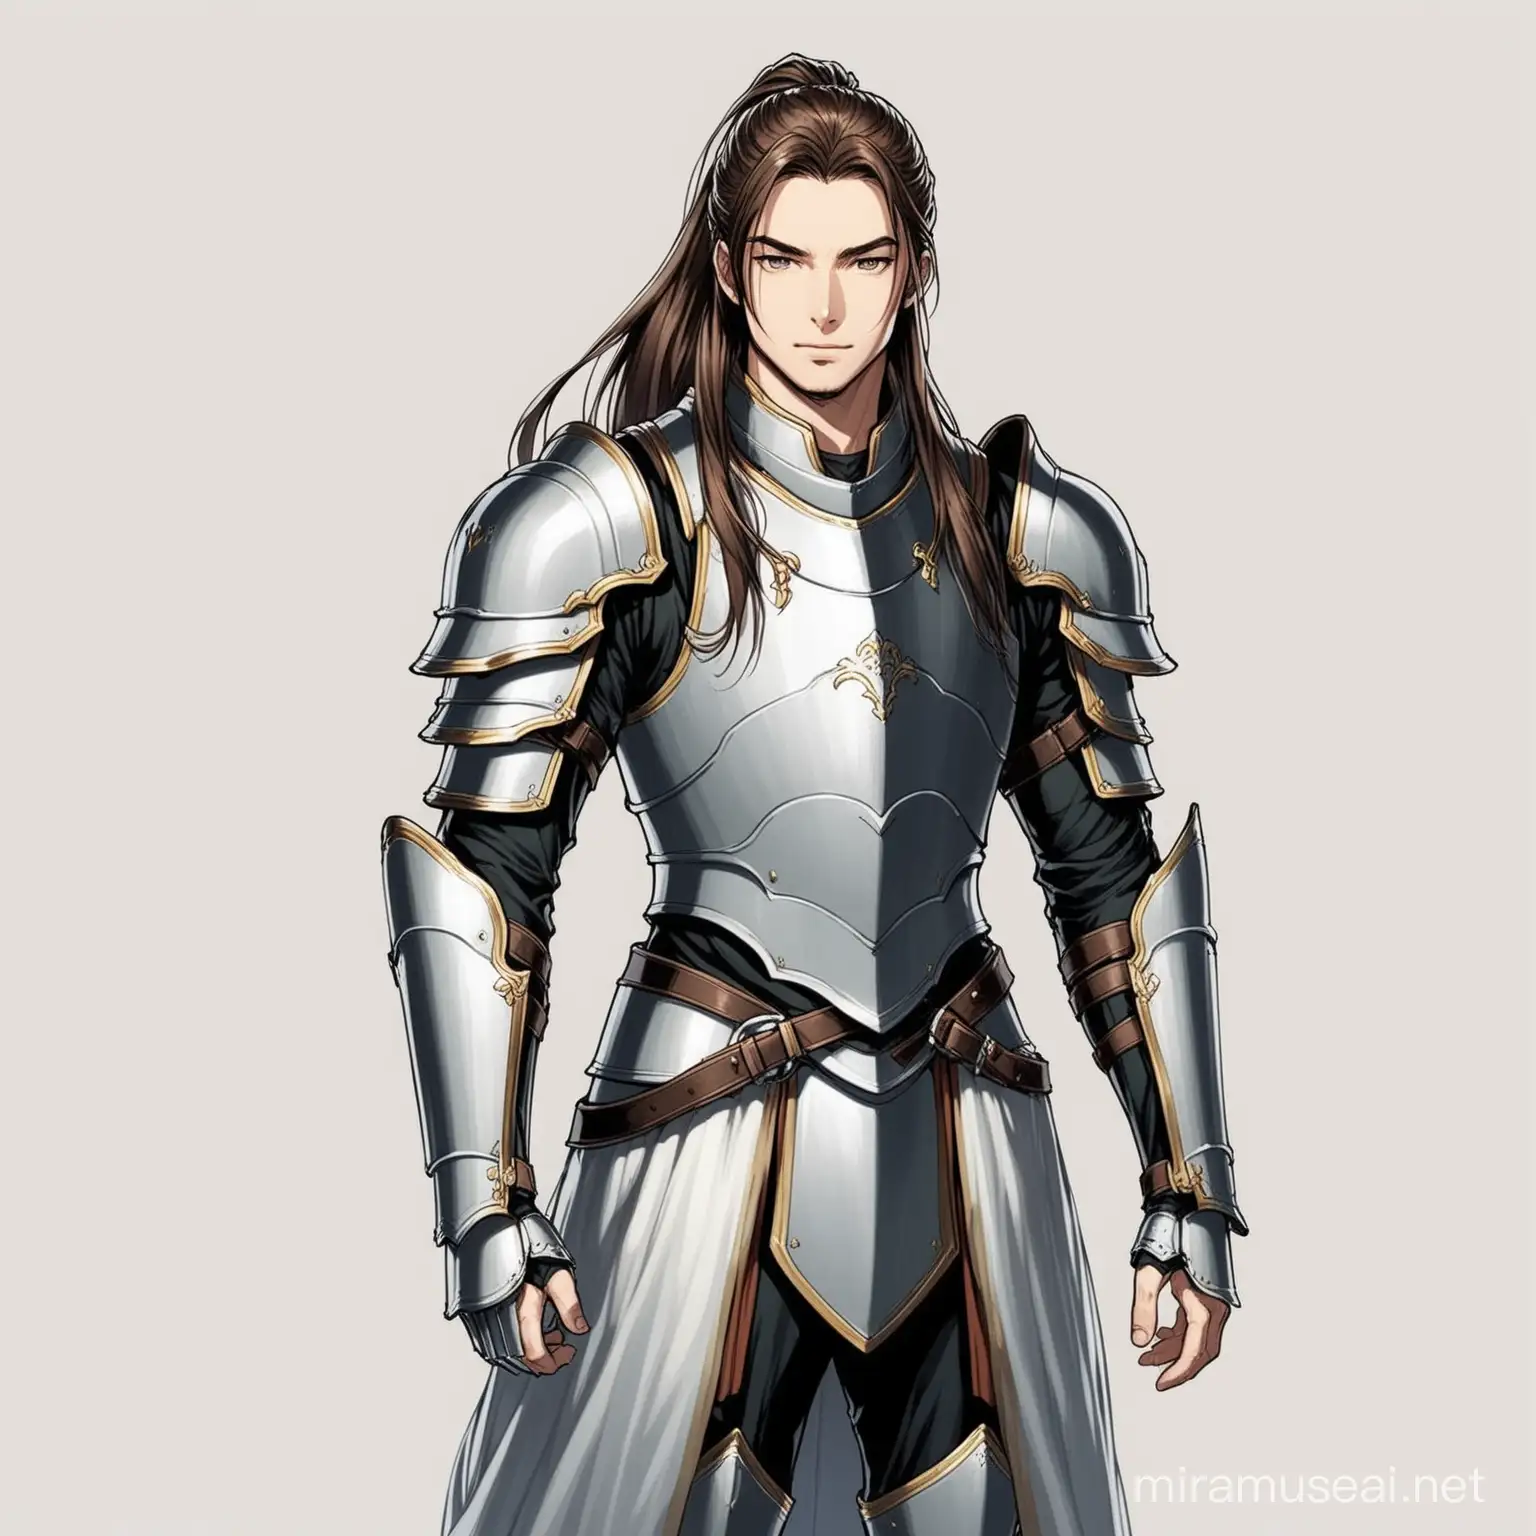 Brave Warrior in Light Armour with Flowing Ponytail